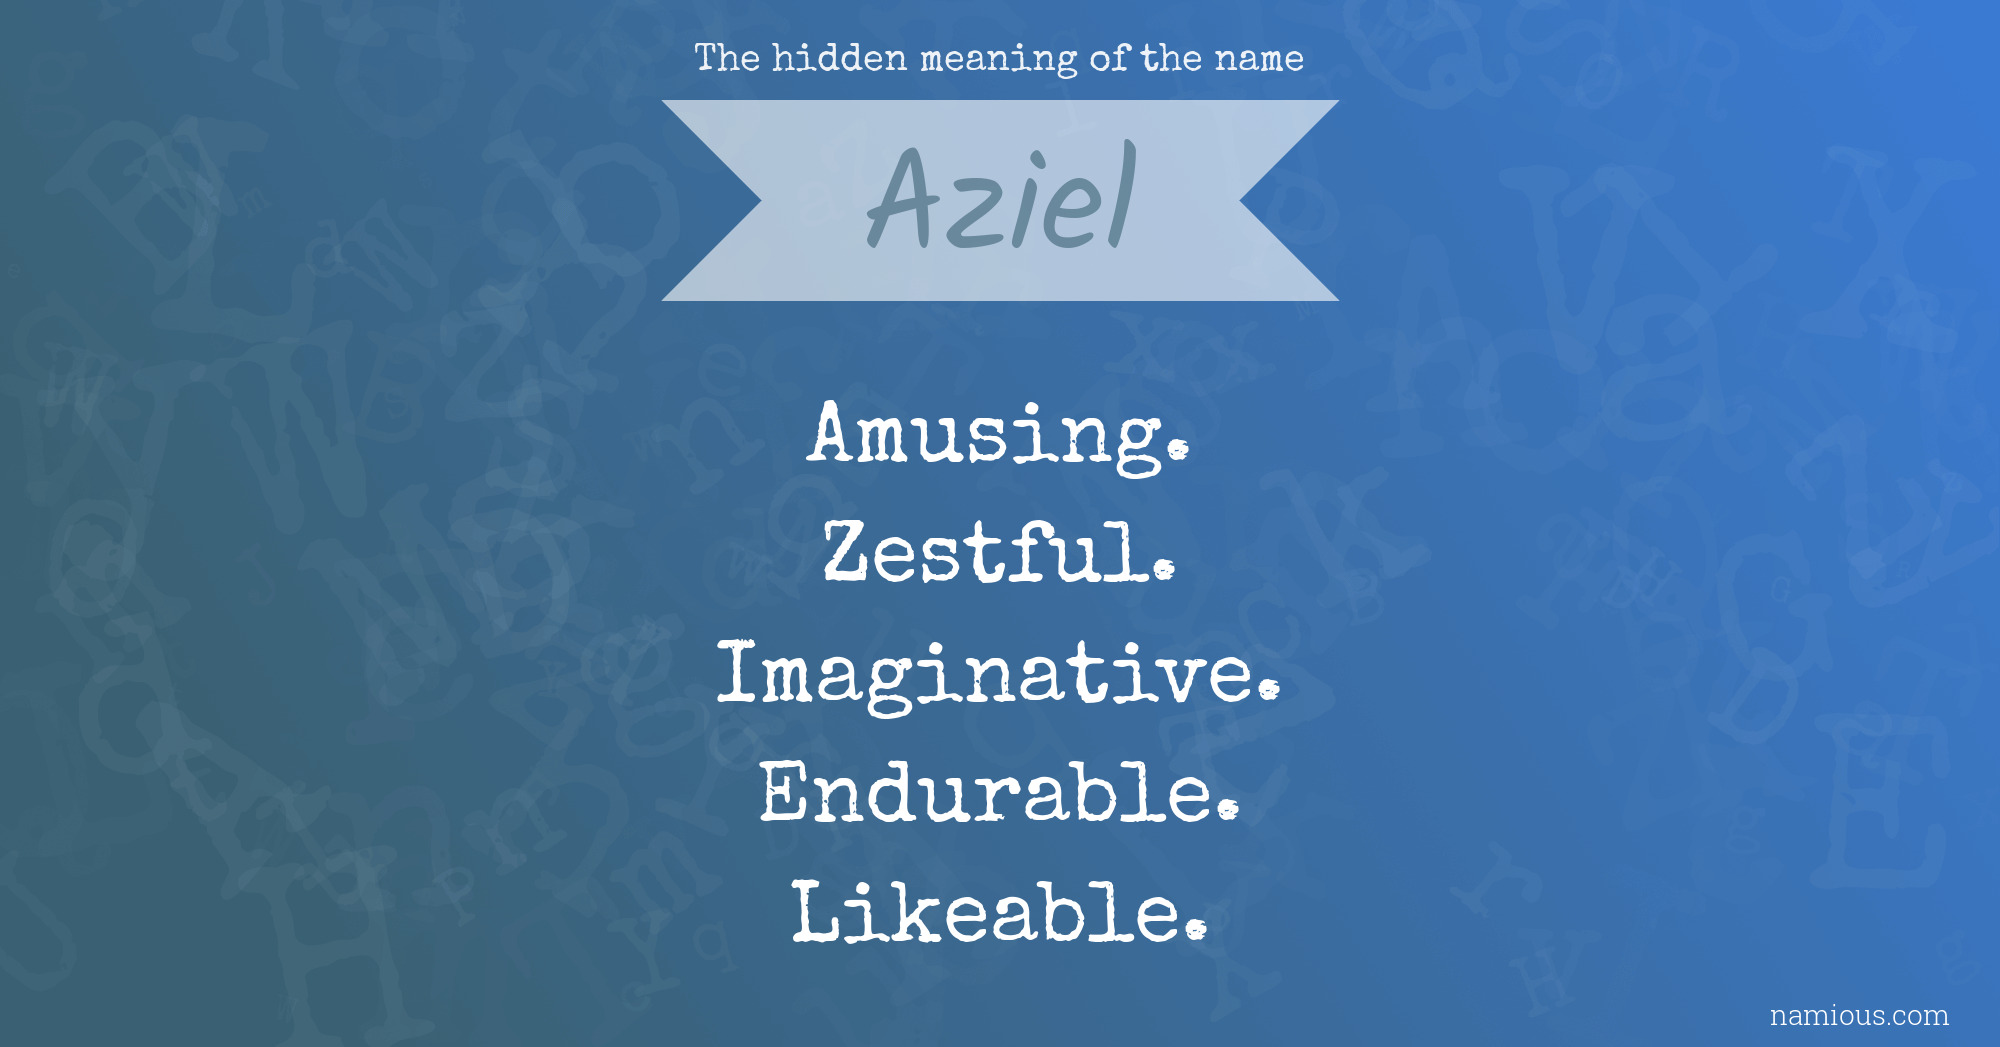 The Hidden Meaning Of The Name Aziel | Namious